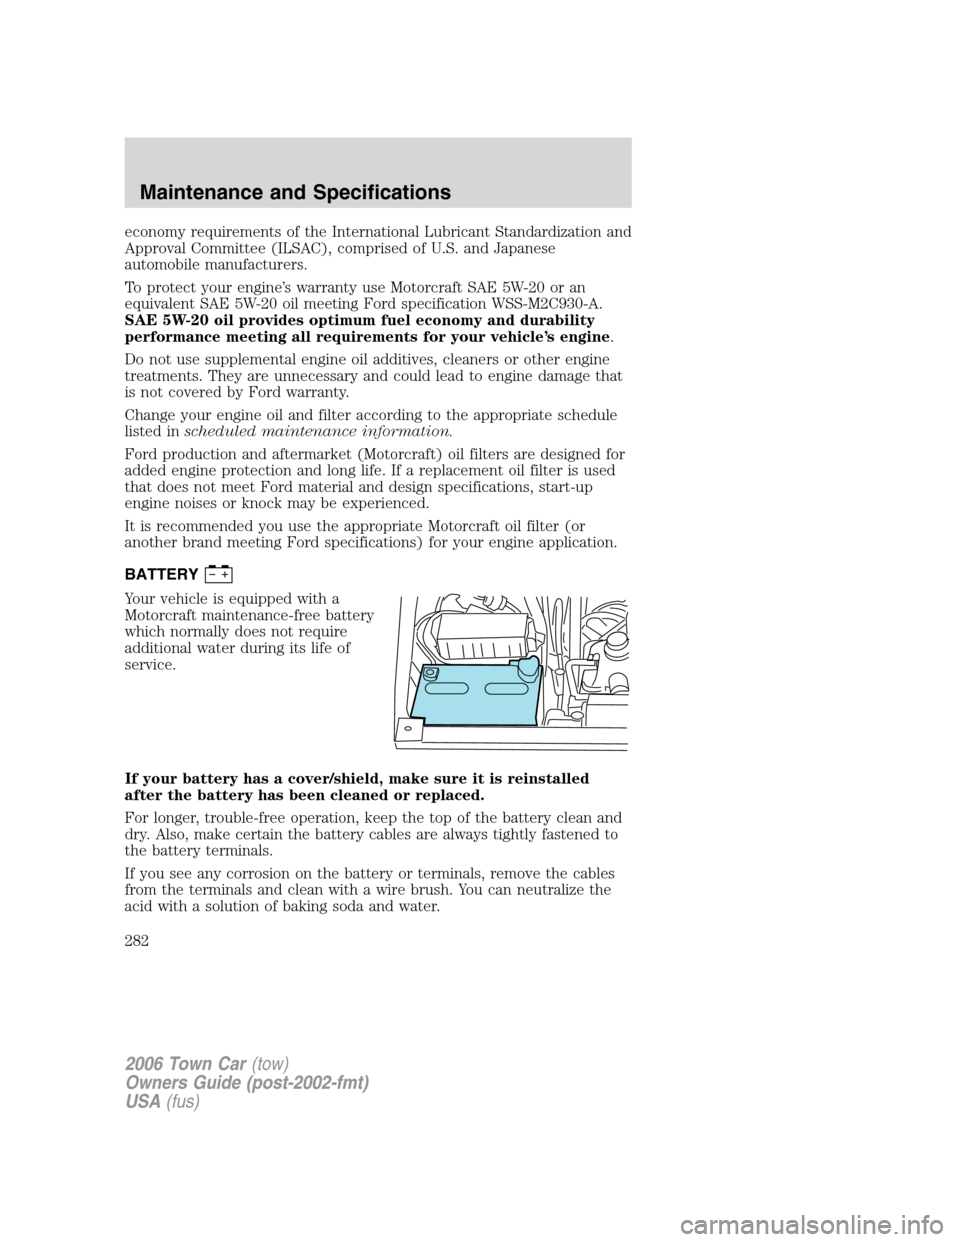 LINCOLN TOWN CAR 2006  Owners Manual economy requirements of the International Lubricant Standardization and
Approval Committee (ILSAC), comprised of U.S. and Japanese
automobile manufacturers.
To protect your engine’s warranty use Mot